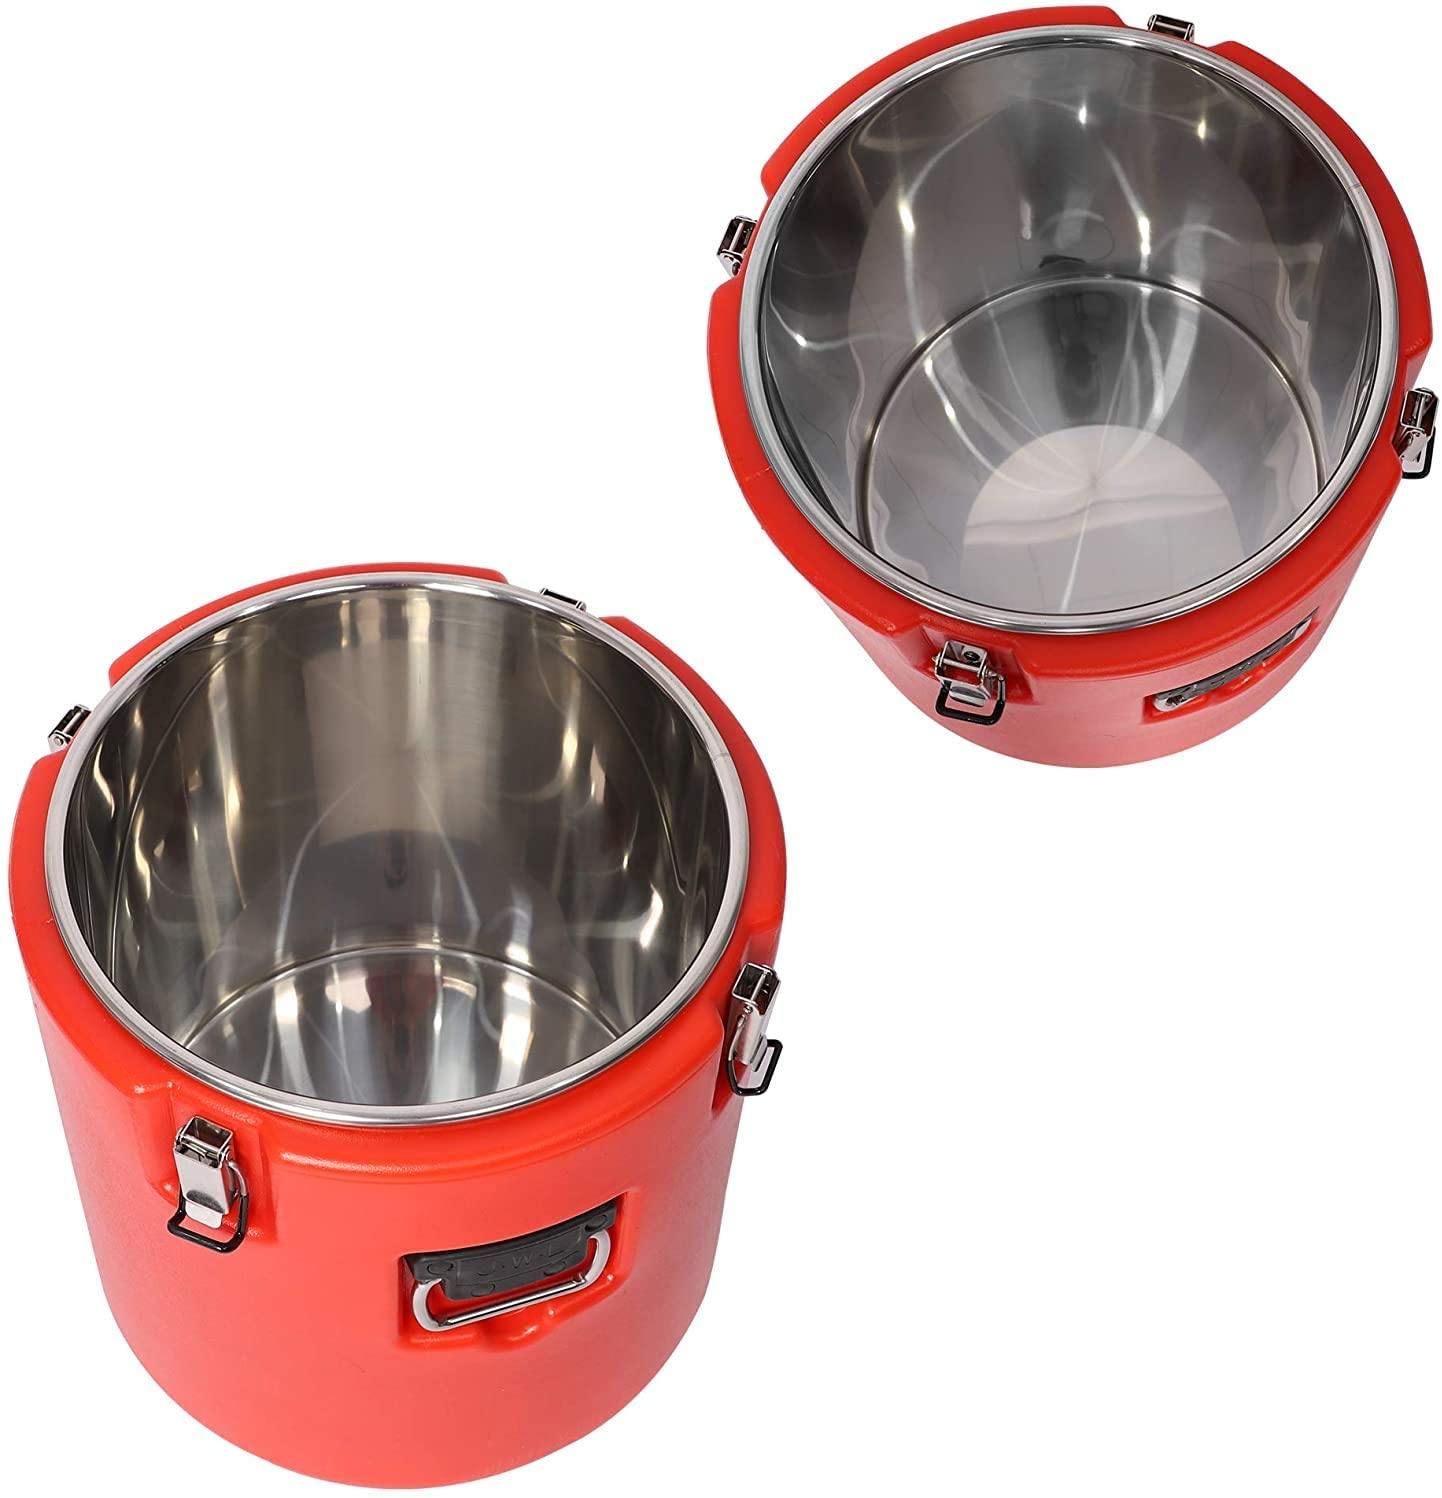 Commercial 30L Large Food Warmers Bucket Double Stainless, Keep Food Cold Hot Constant Temperature for Restaurant,Party Meal (Red) - Bosonshop